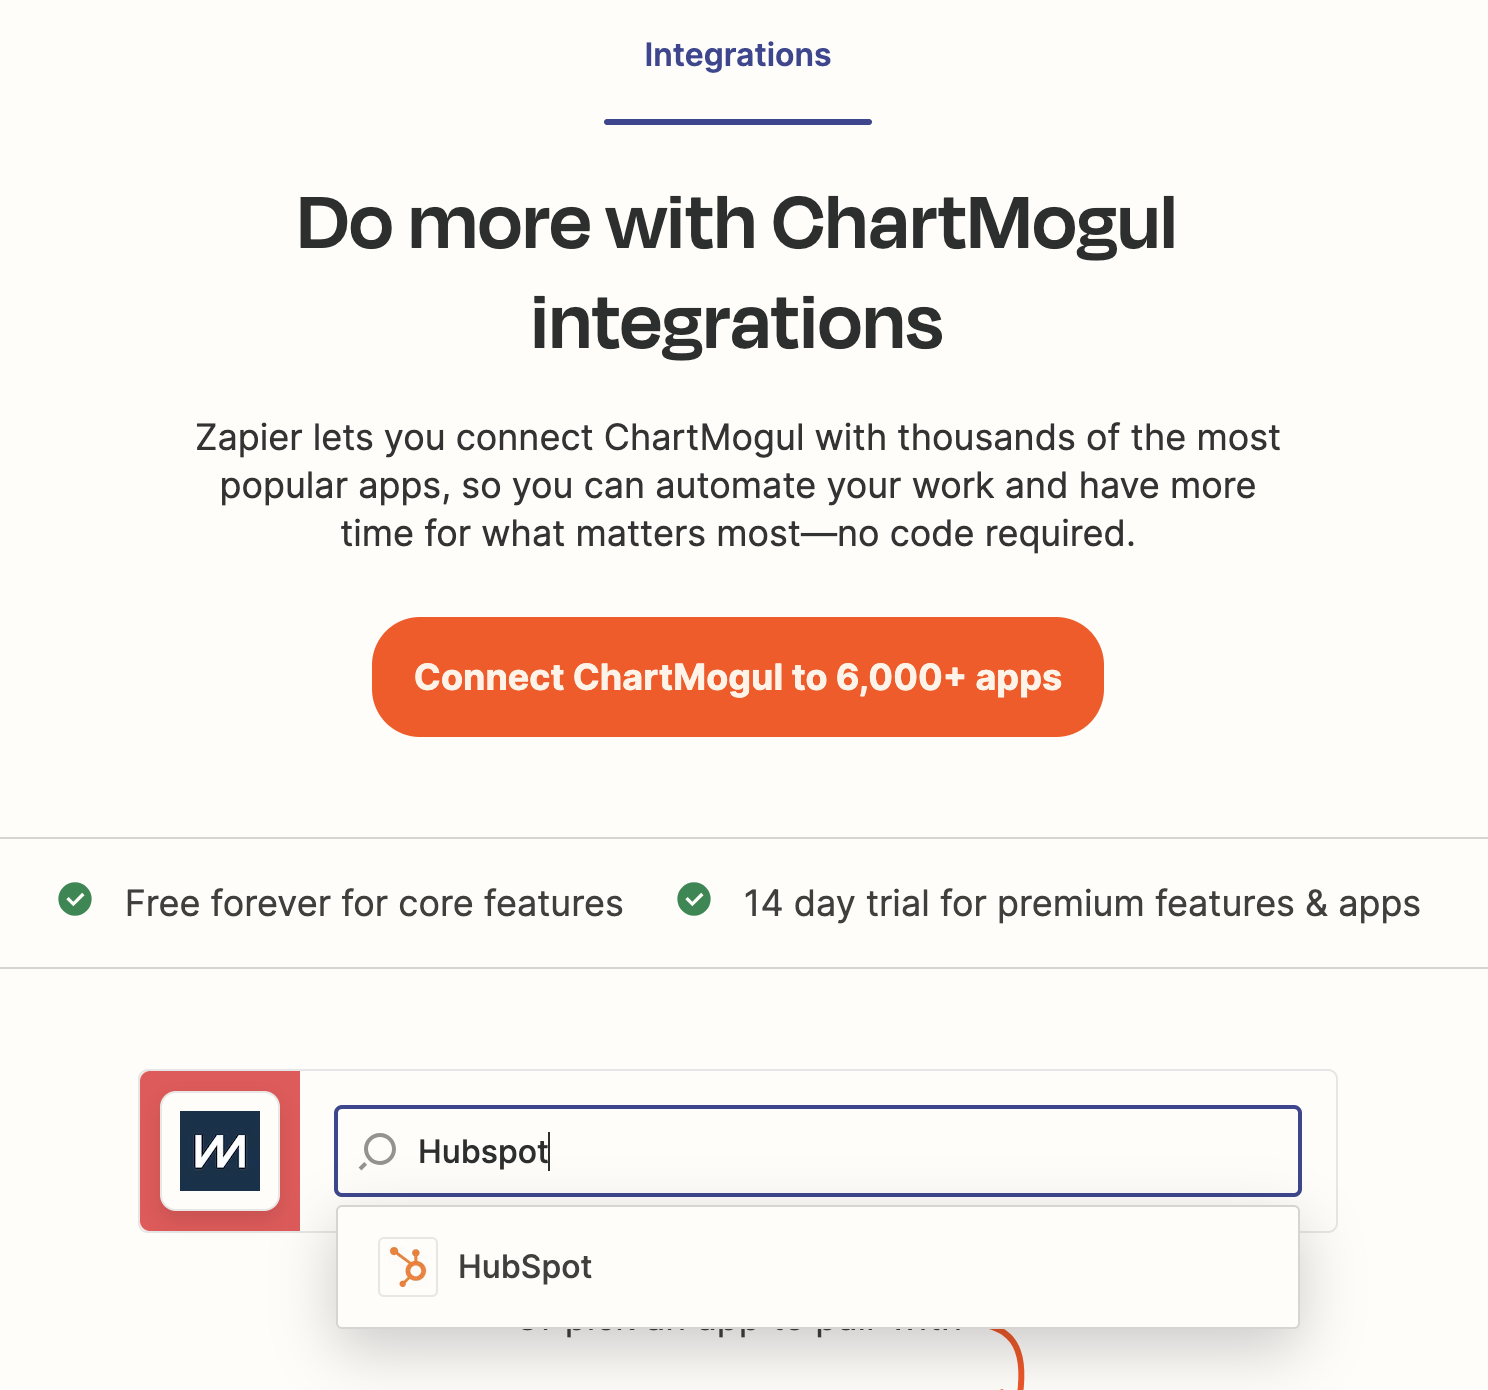 Screenshot of Zapier’s ChartMogul integrations page with search results for Hubspot.